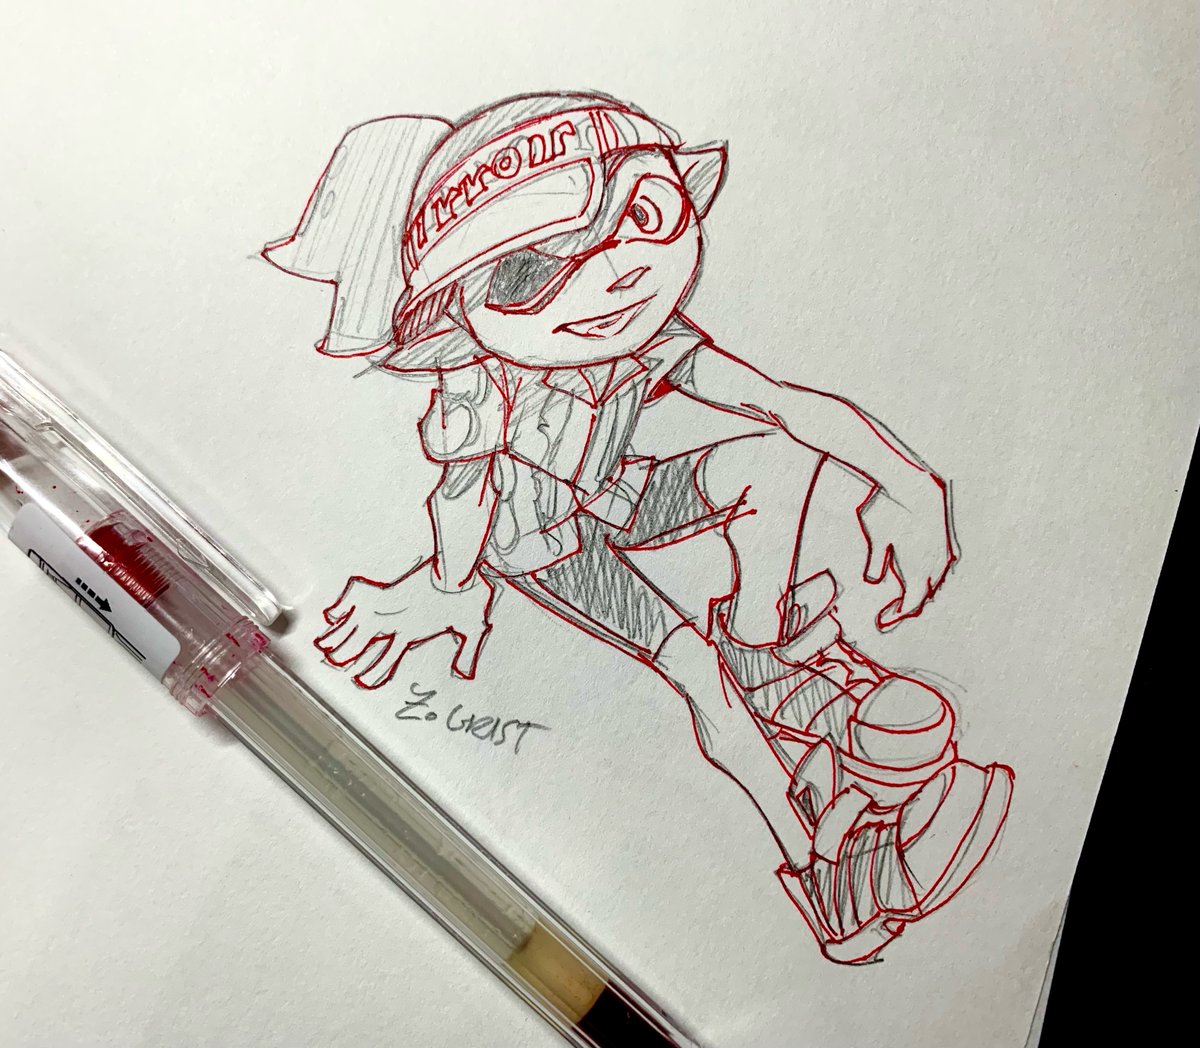 Sketch Commission of Aloha from #Splatoon for Ite on Ko-fi 
Commission are open: ko-fi.com/z_grist/commis…